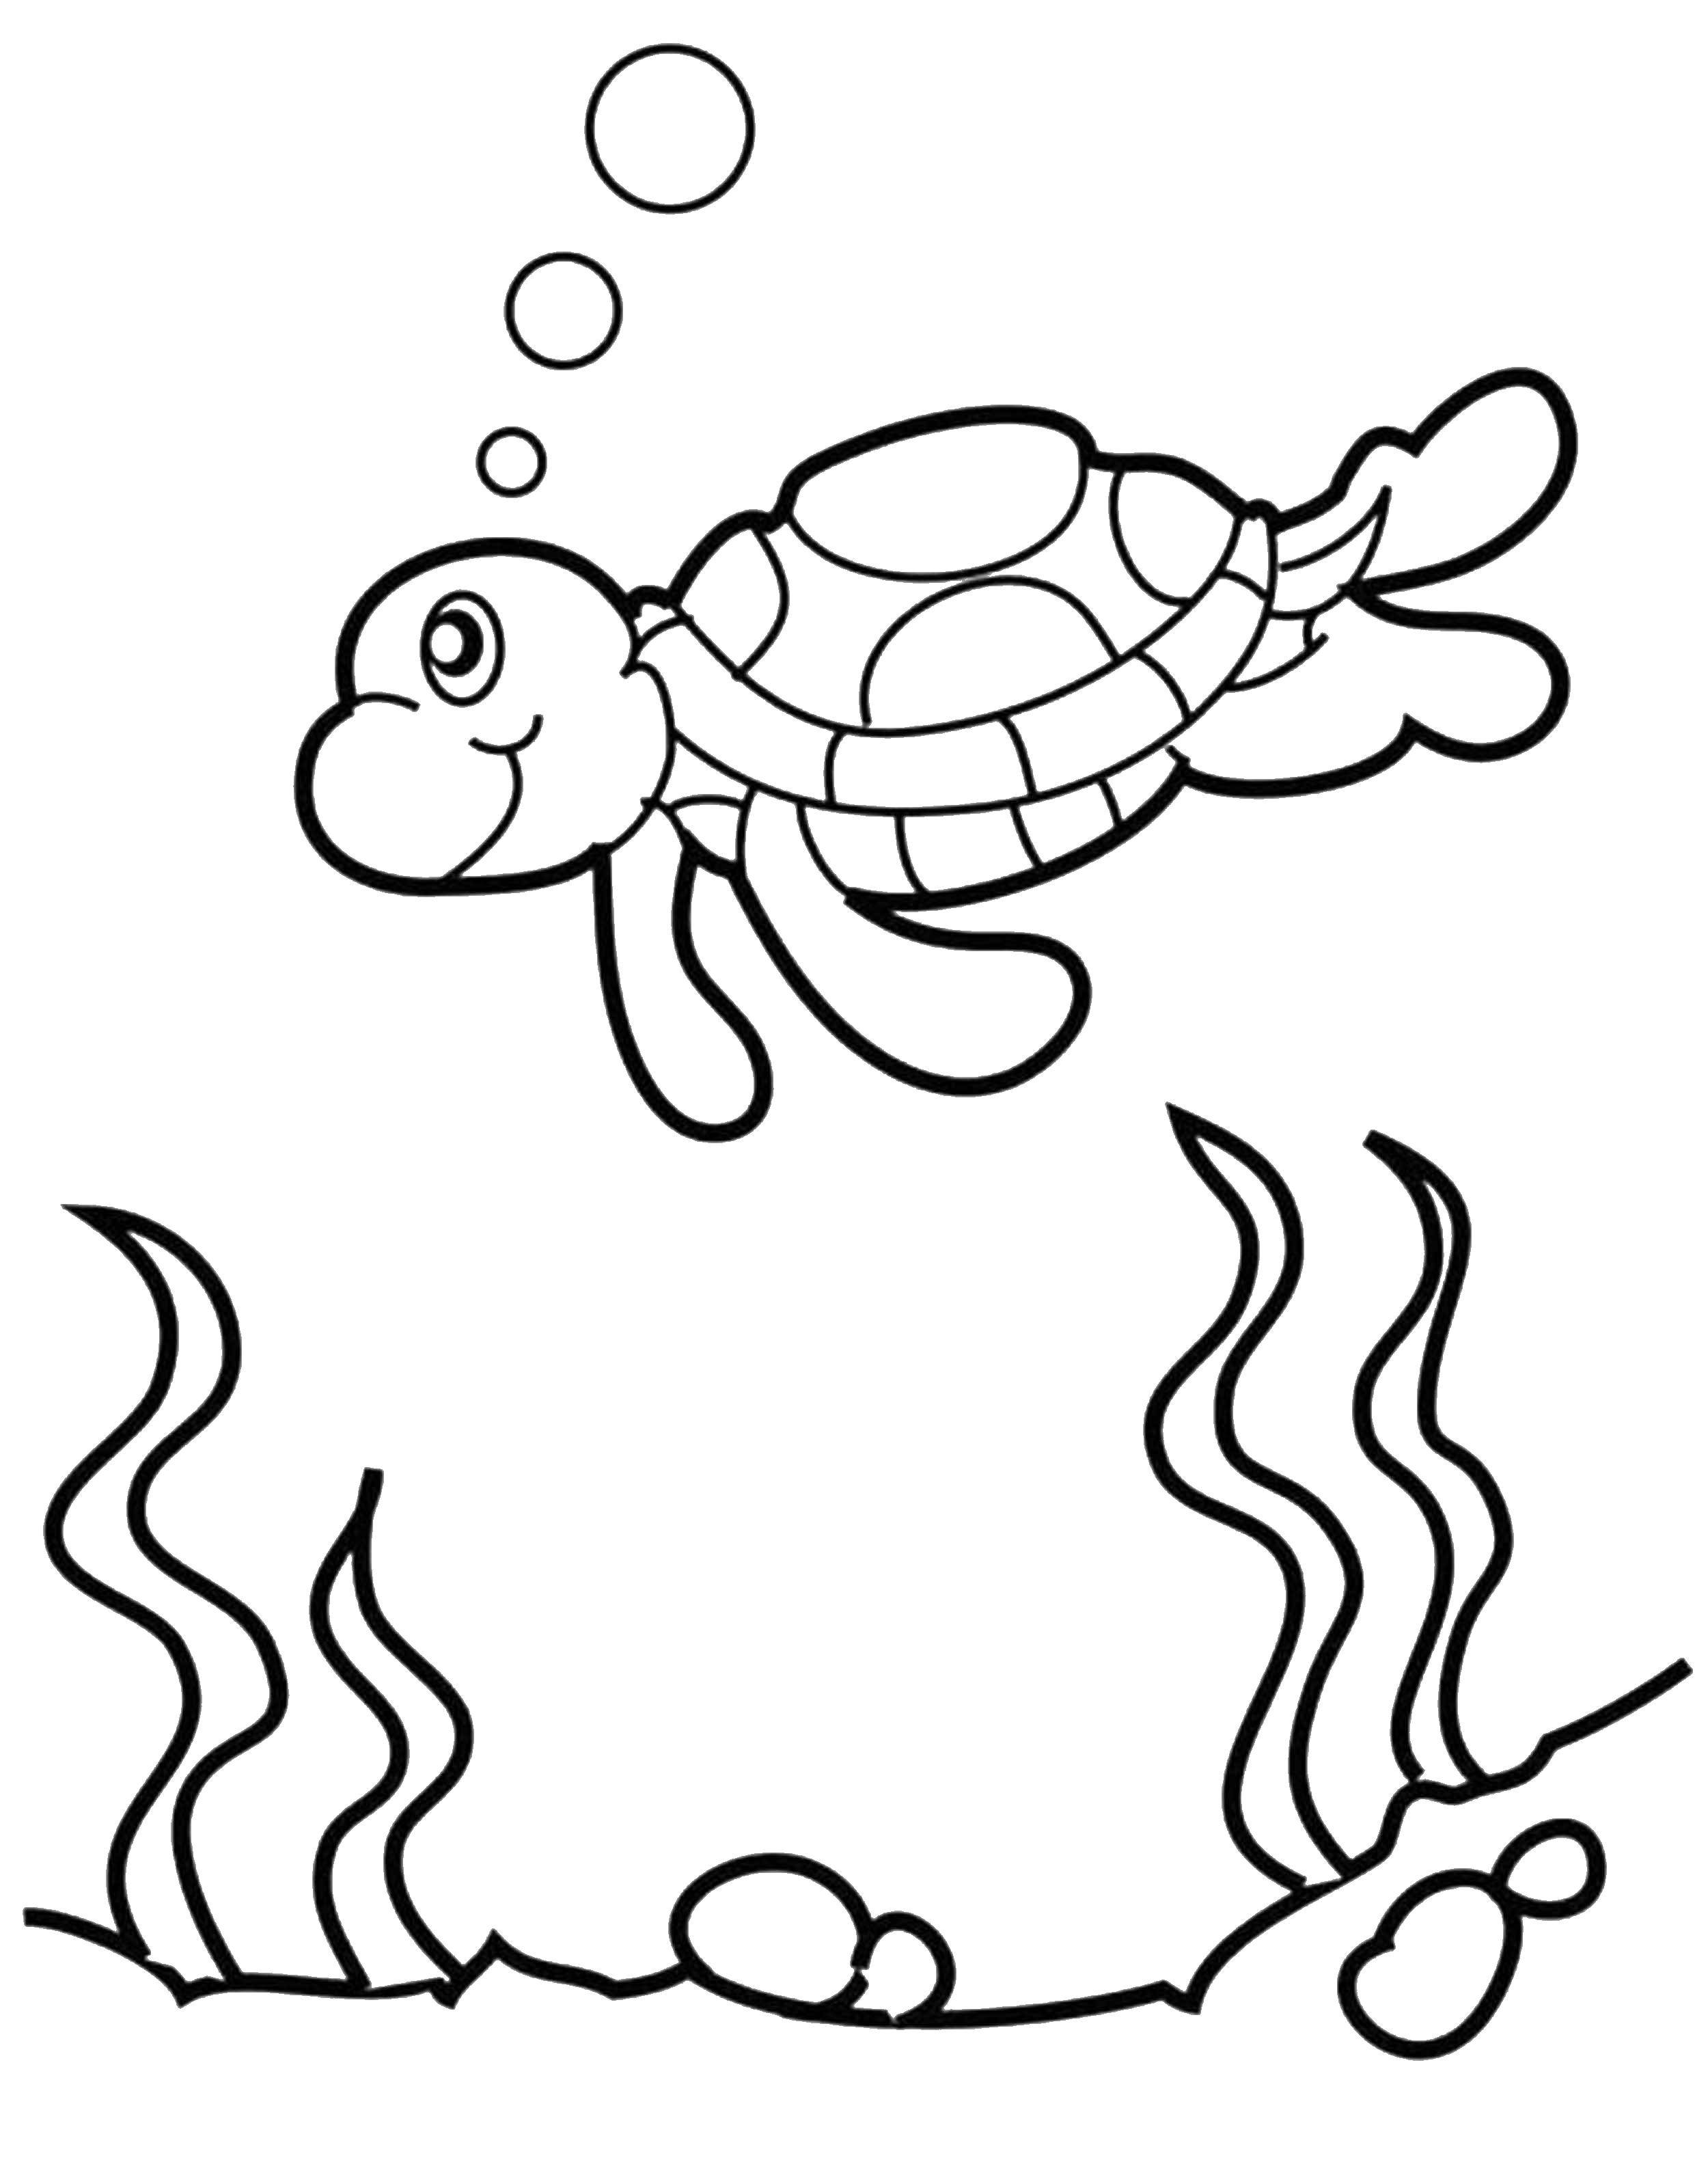 Coloring The bubbles from the turtles. Category Turtle. Tags:  Reptile, turtle.